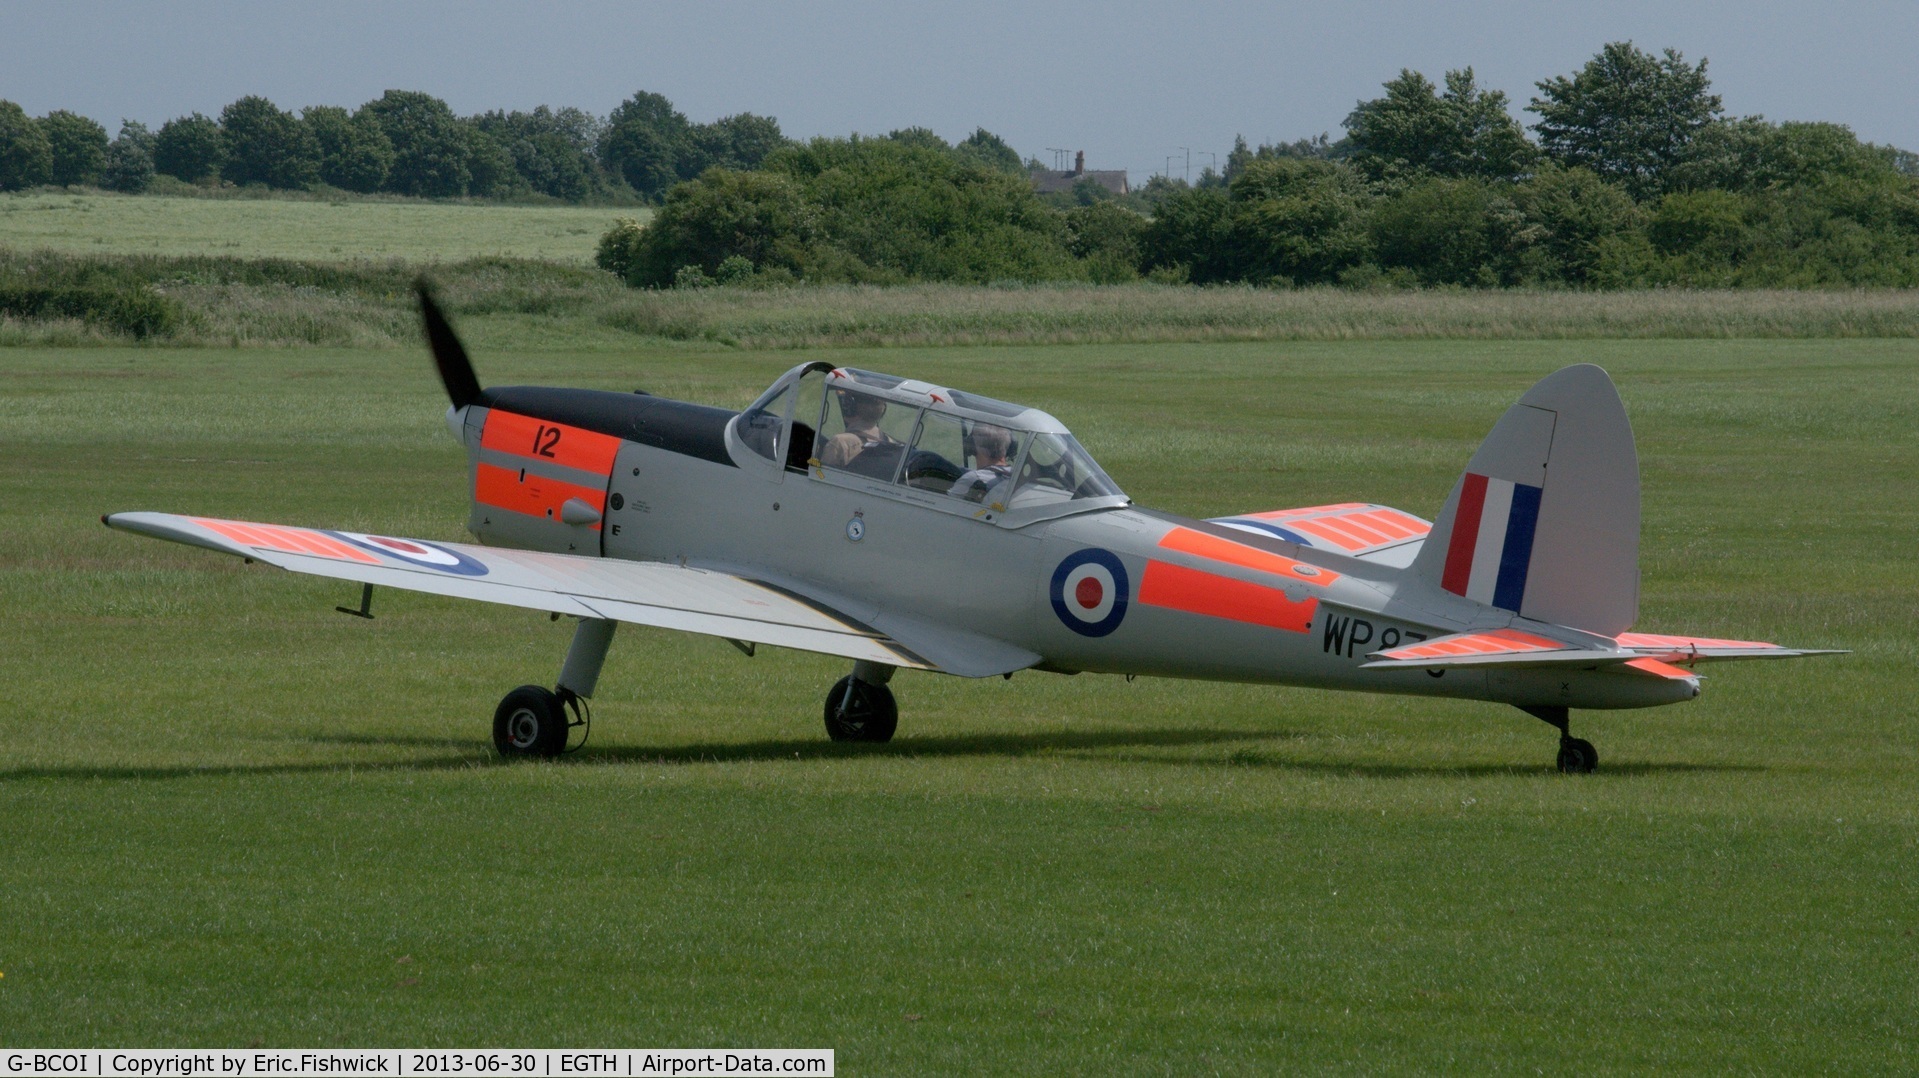 G-BCOI, 1952 De Havilland DHC-1 Chipmunk T.10 C/N C1/0759, 1. WP870 at the Shuttleworth Military Pagent Flying Day, 30 June 2013